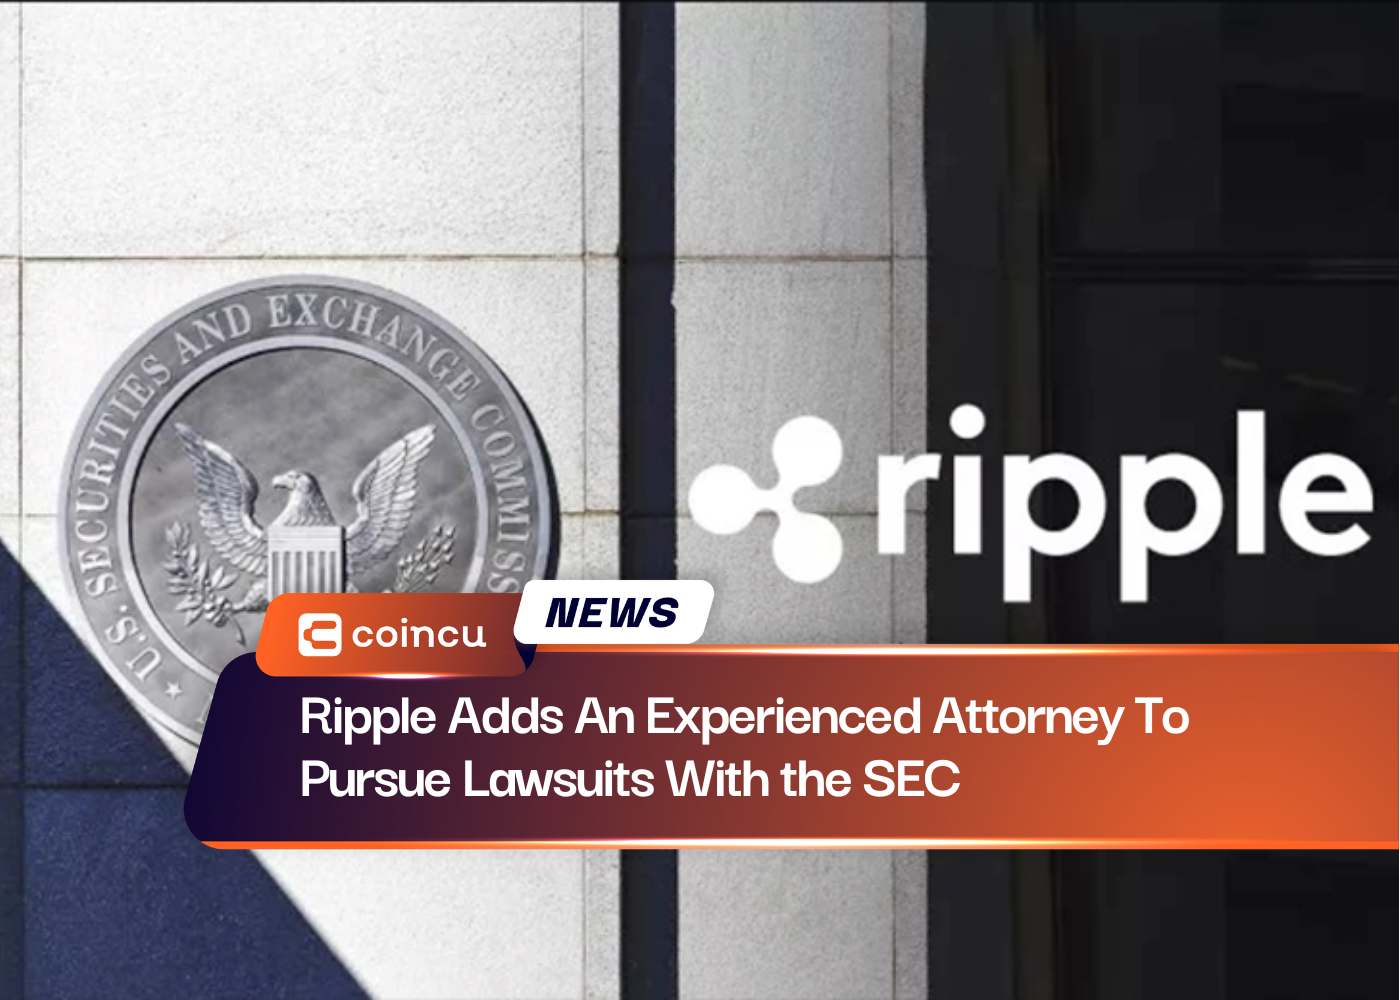 Ripple Adds An Experienced Attorney To Pursue Lawsuits With the SEC